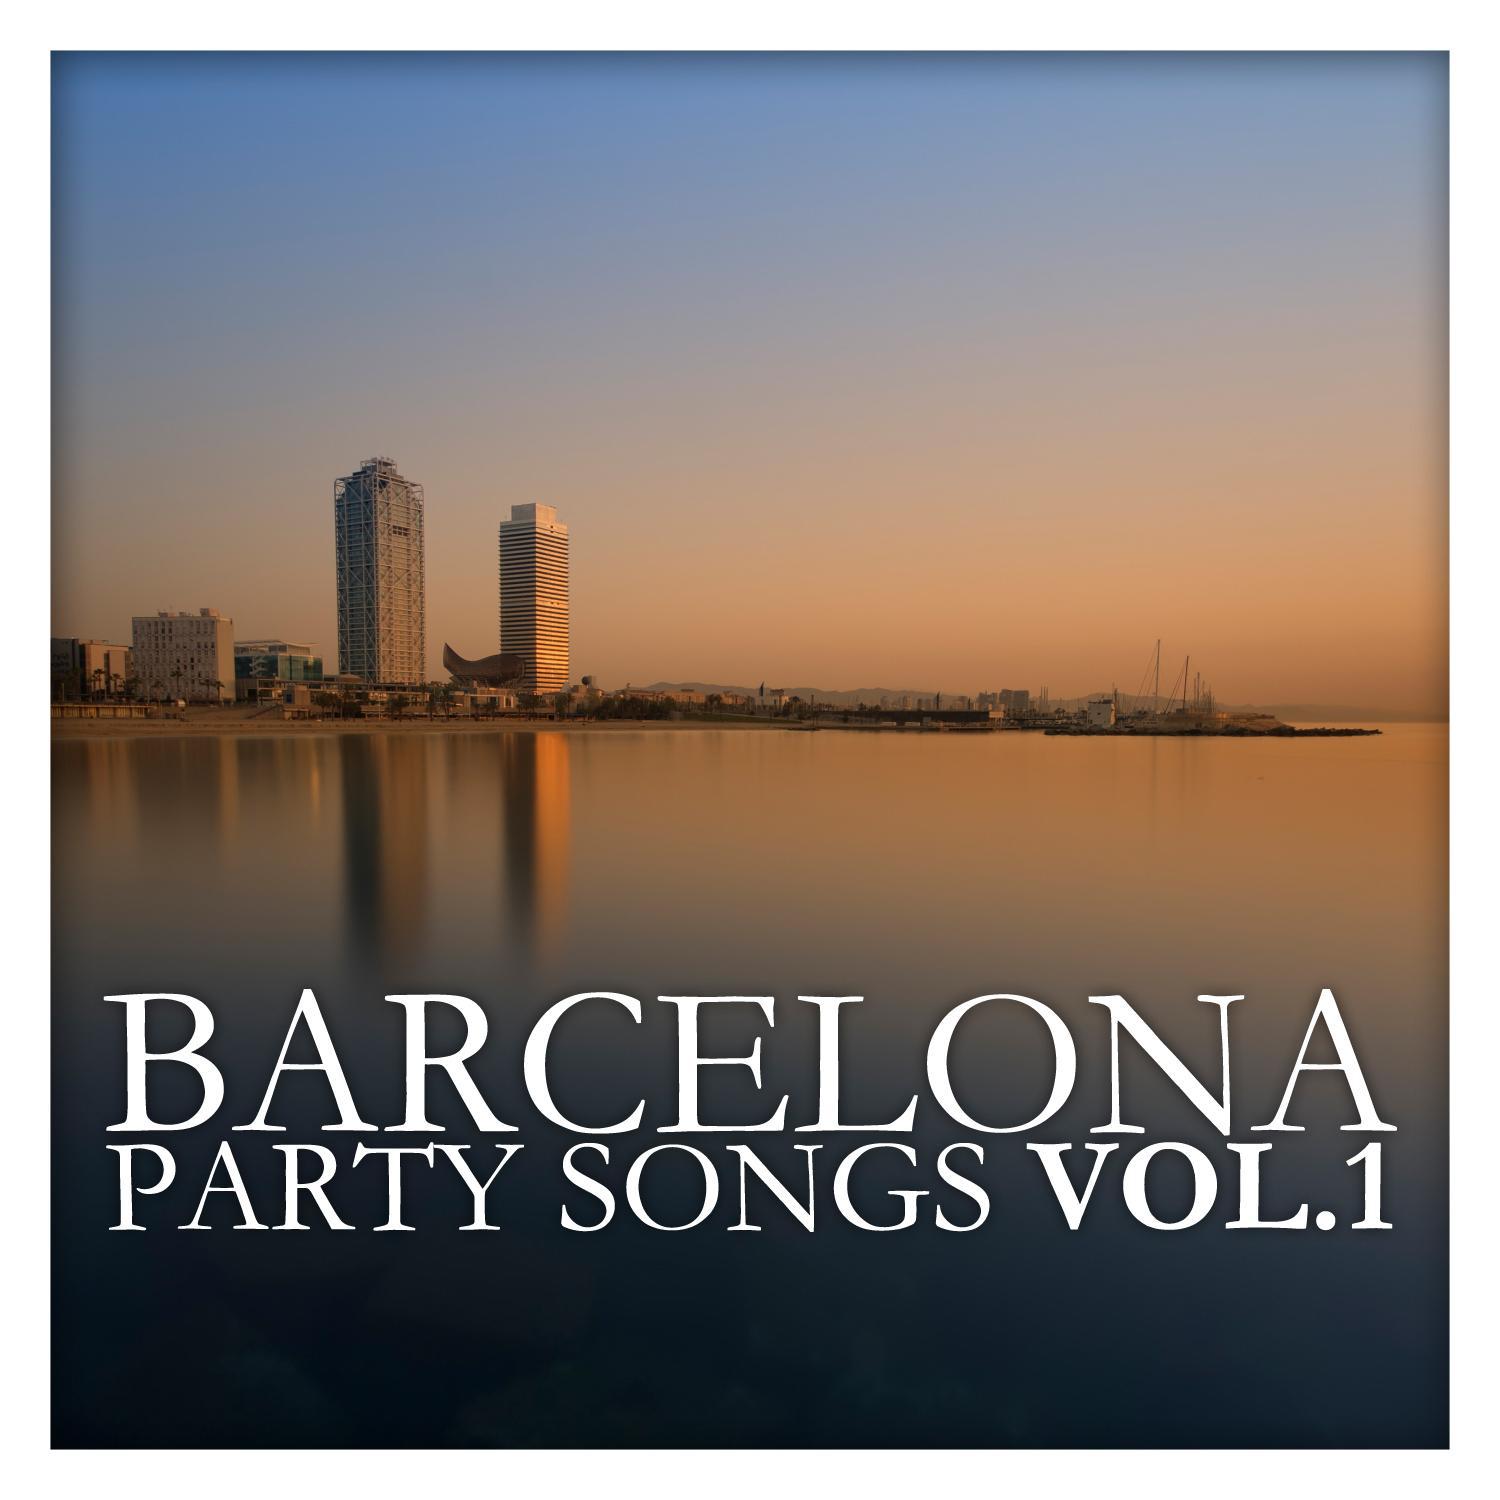 Barcelona Party Songs Vol. 1